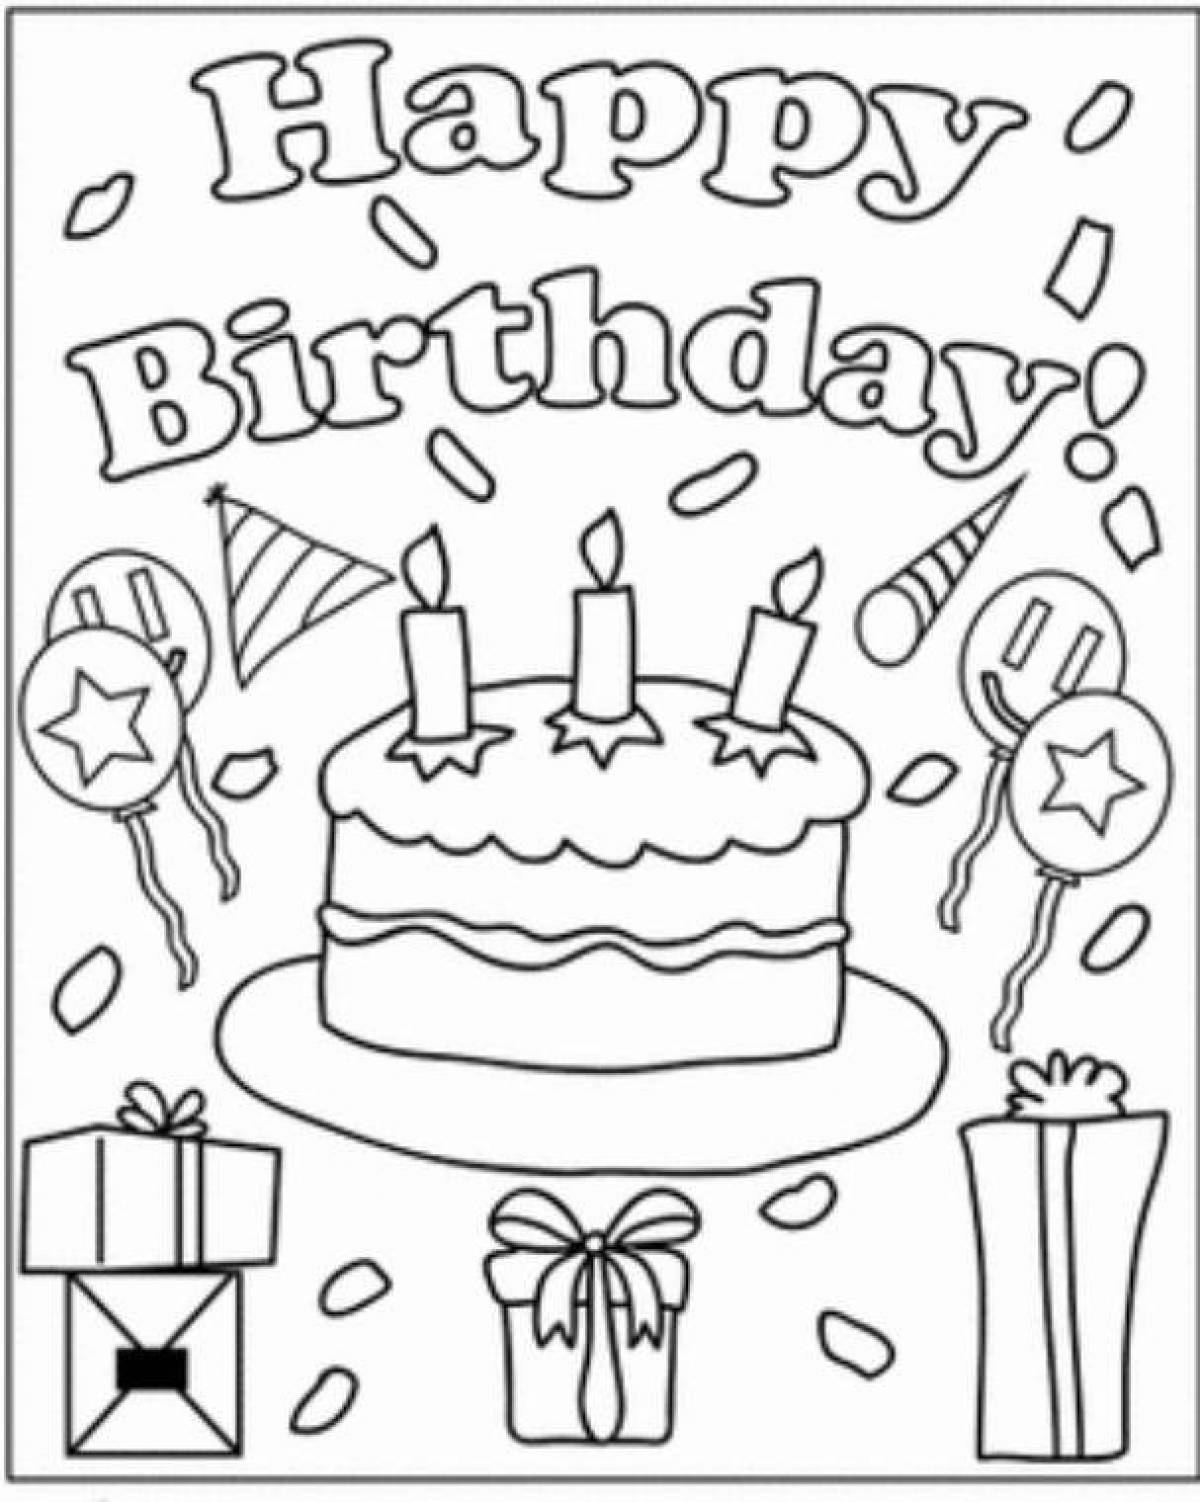 Happy birthday coloring book for dad from daughter